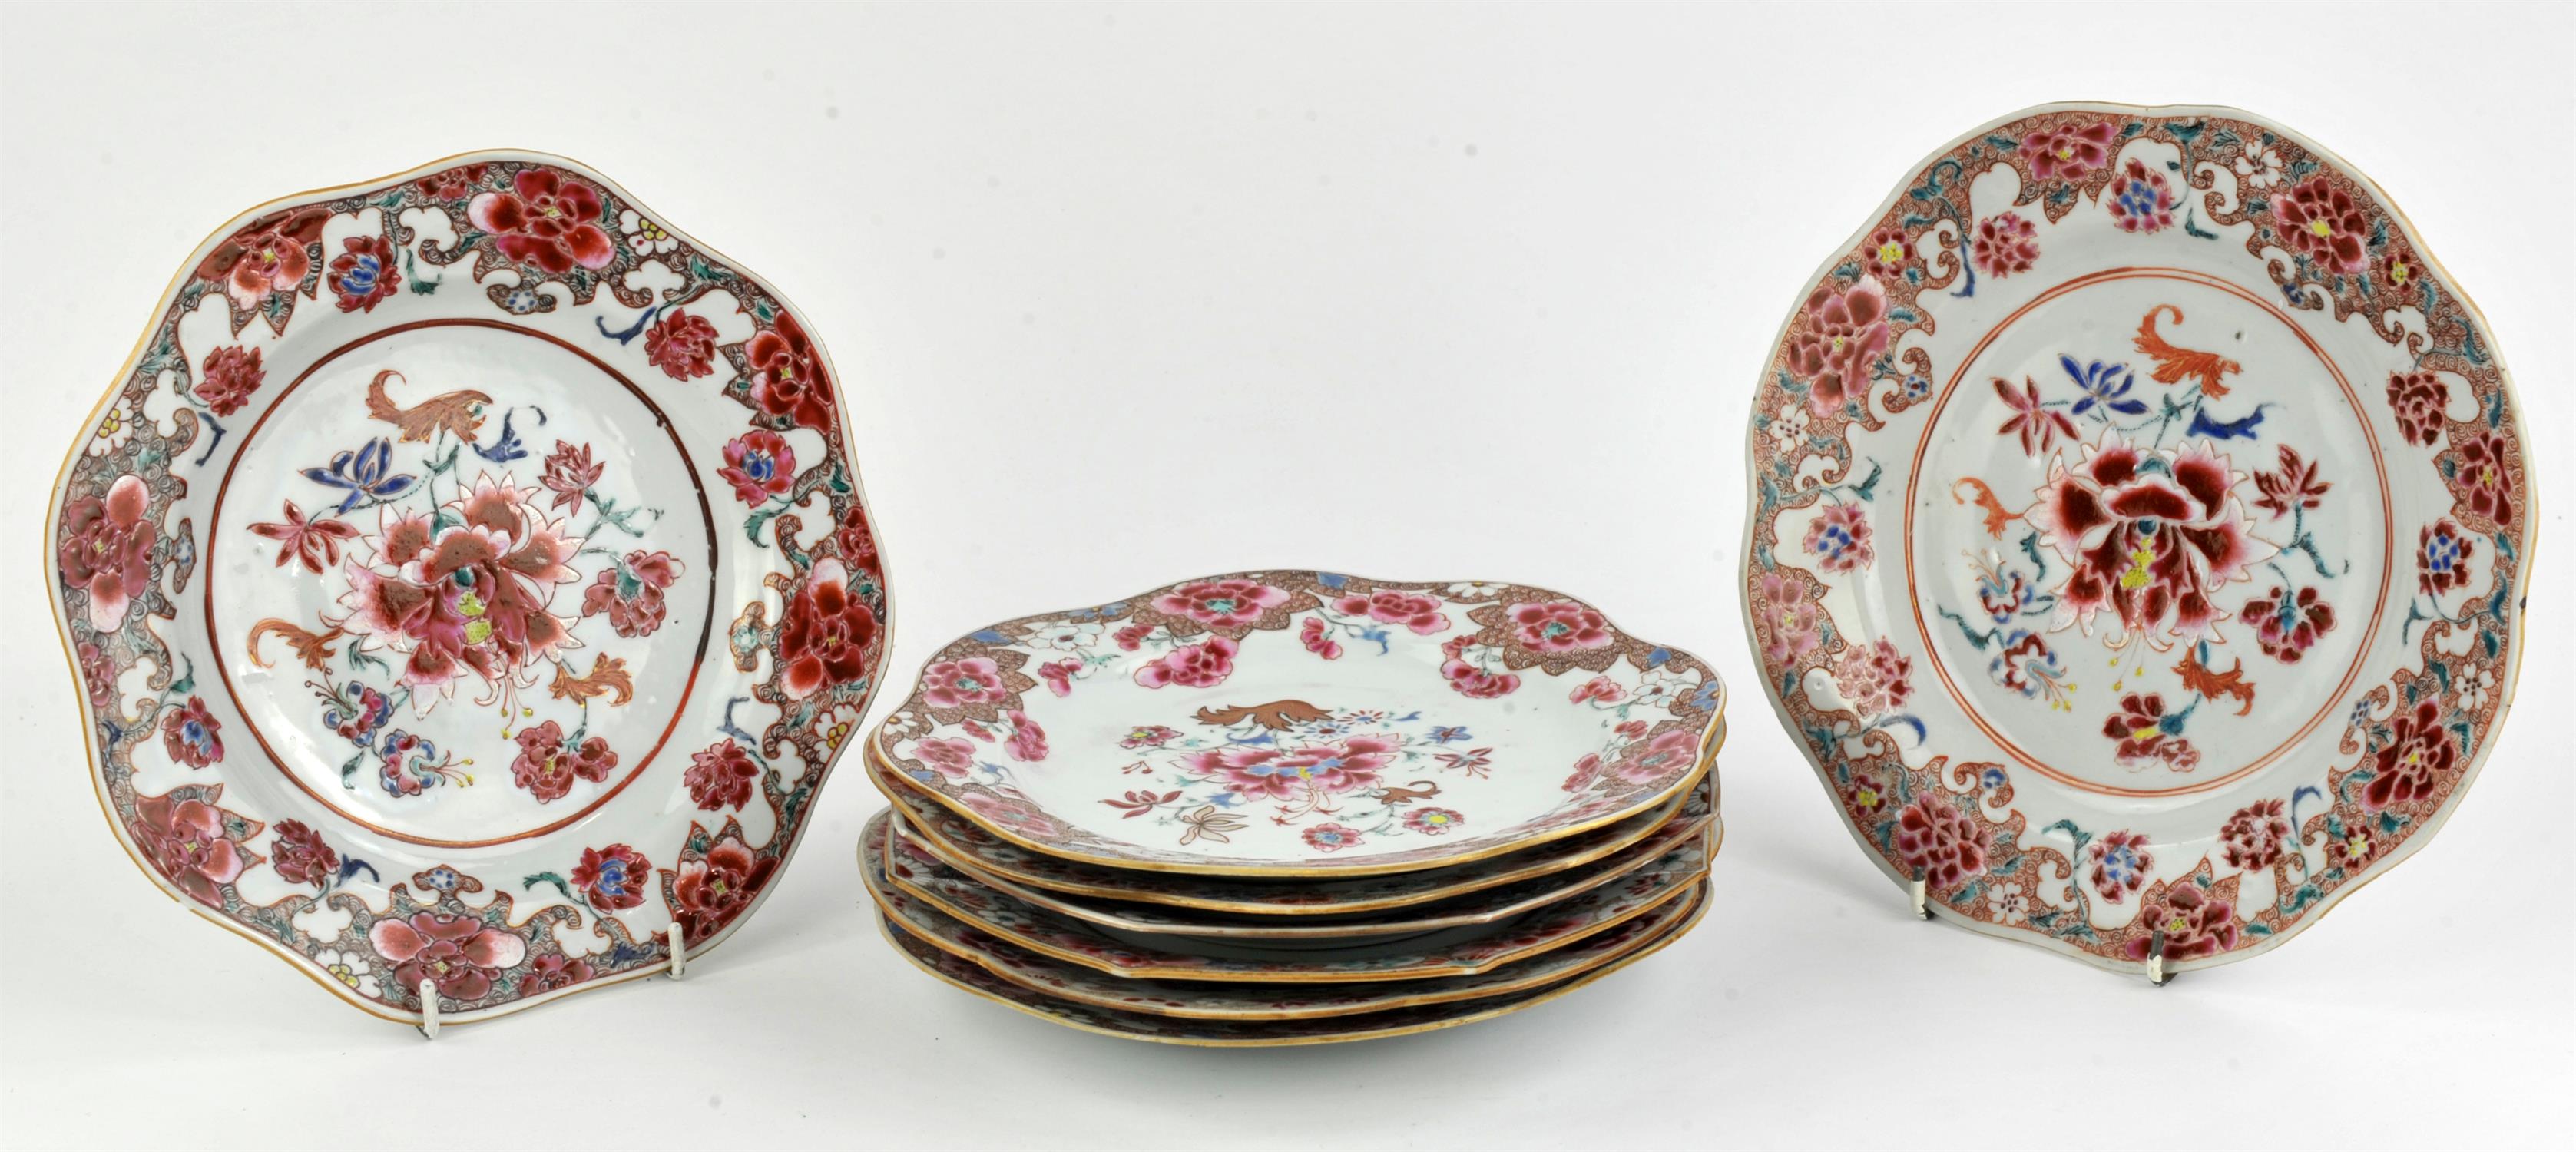 Eight famille rose dishes; each one decorated with floral designs and about 22.5 cm diameter - Image 4 of 14